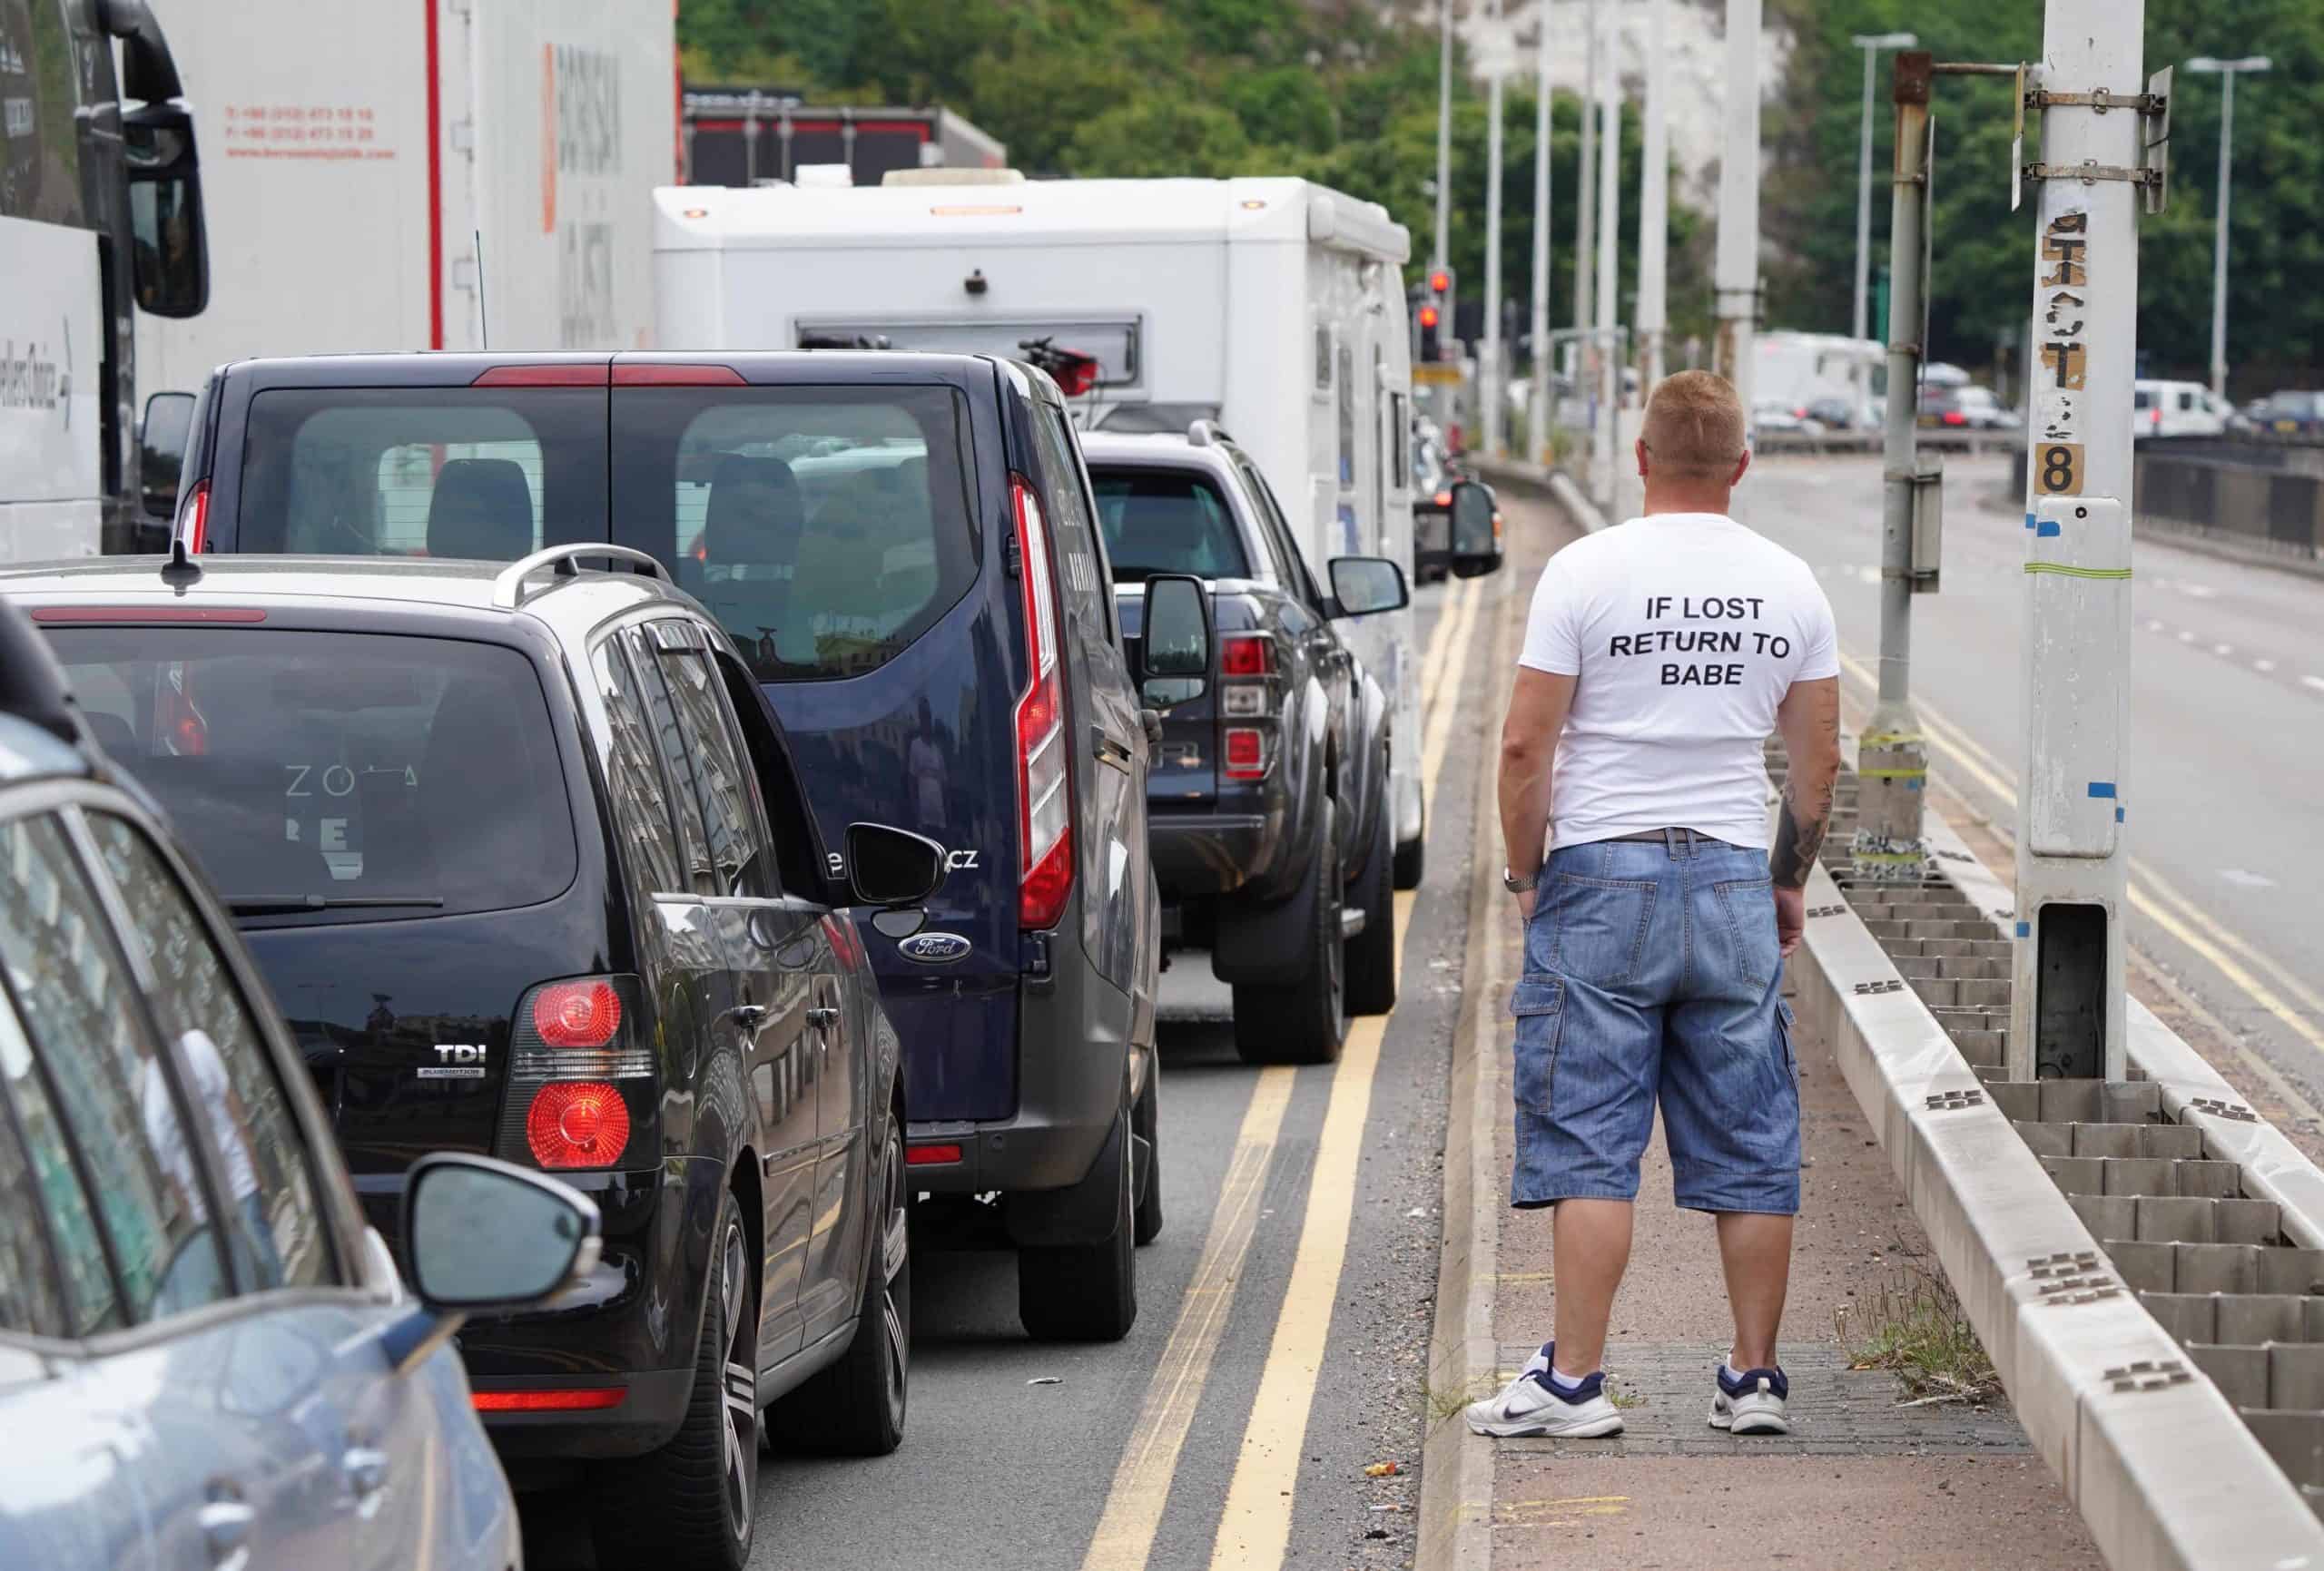 In pictures: Holidaymakers stuck in hours of queues with traffic at a standstill